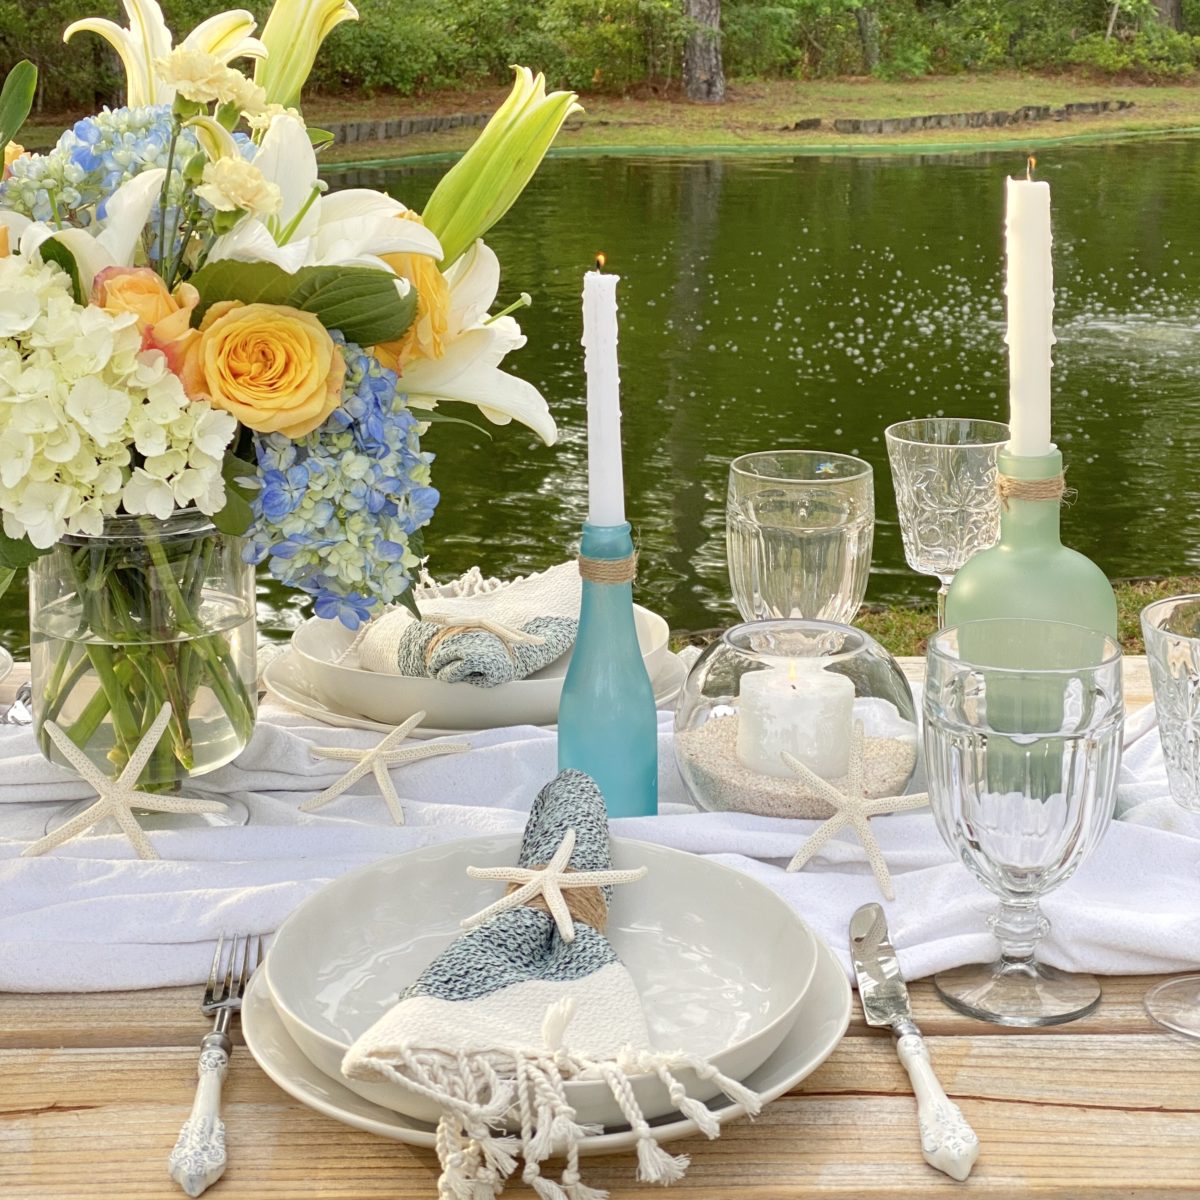 Simple summer tablescape close up of a place setting.